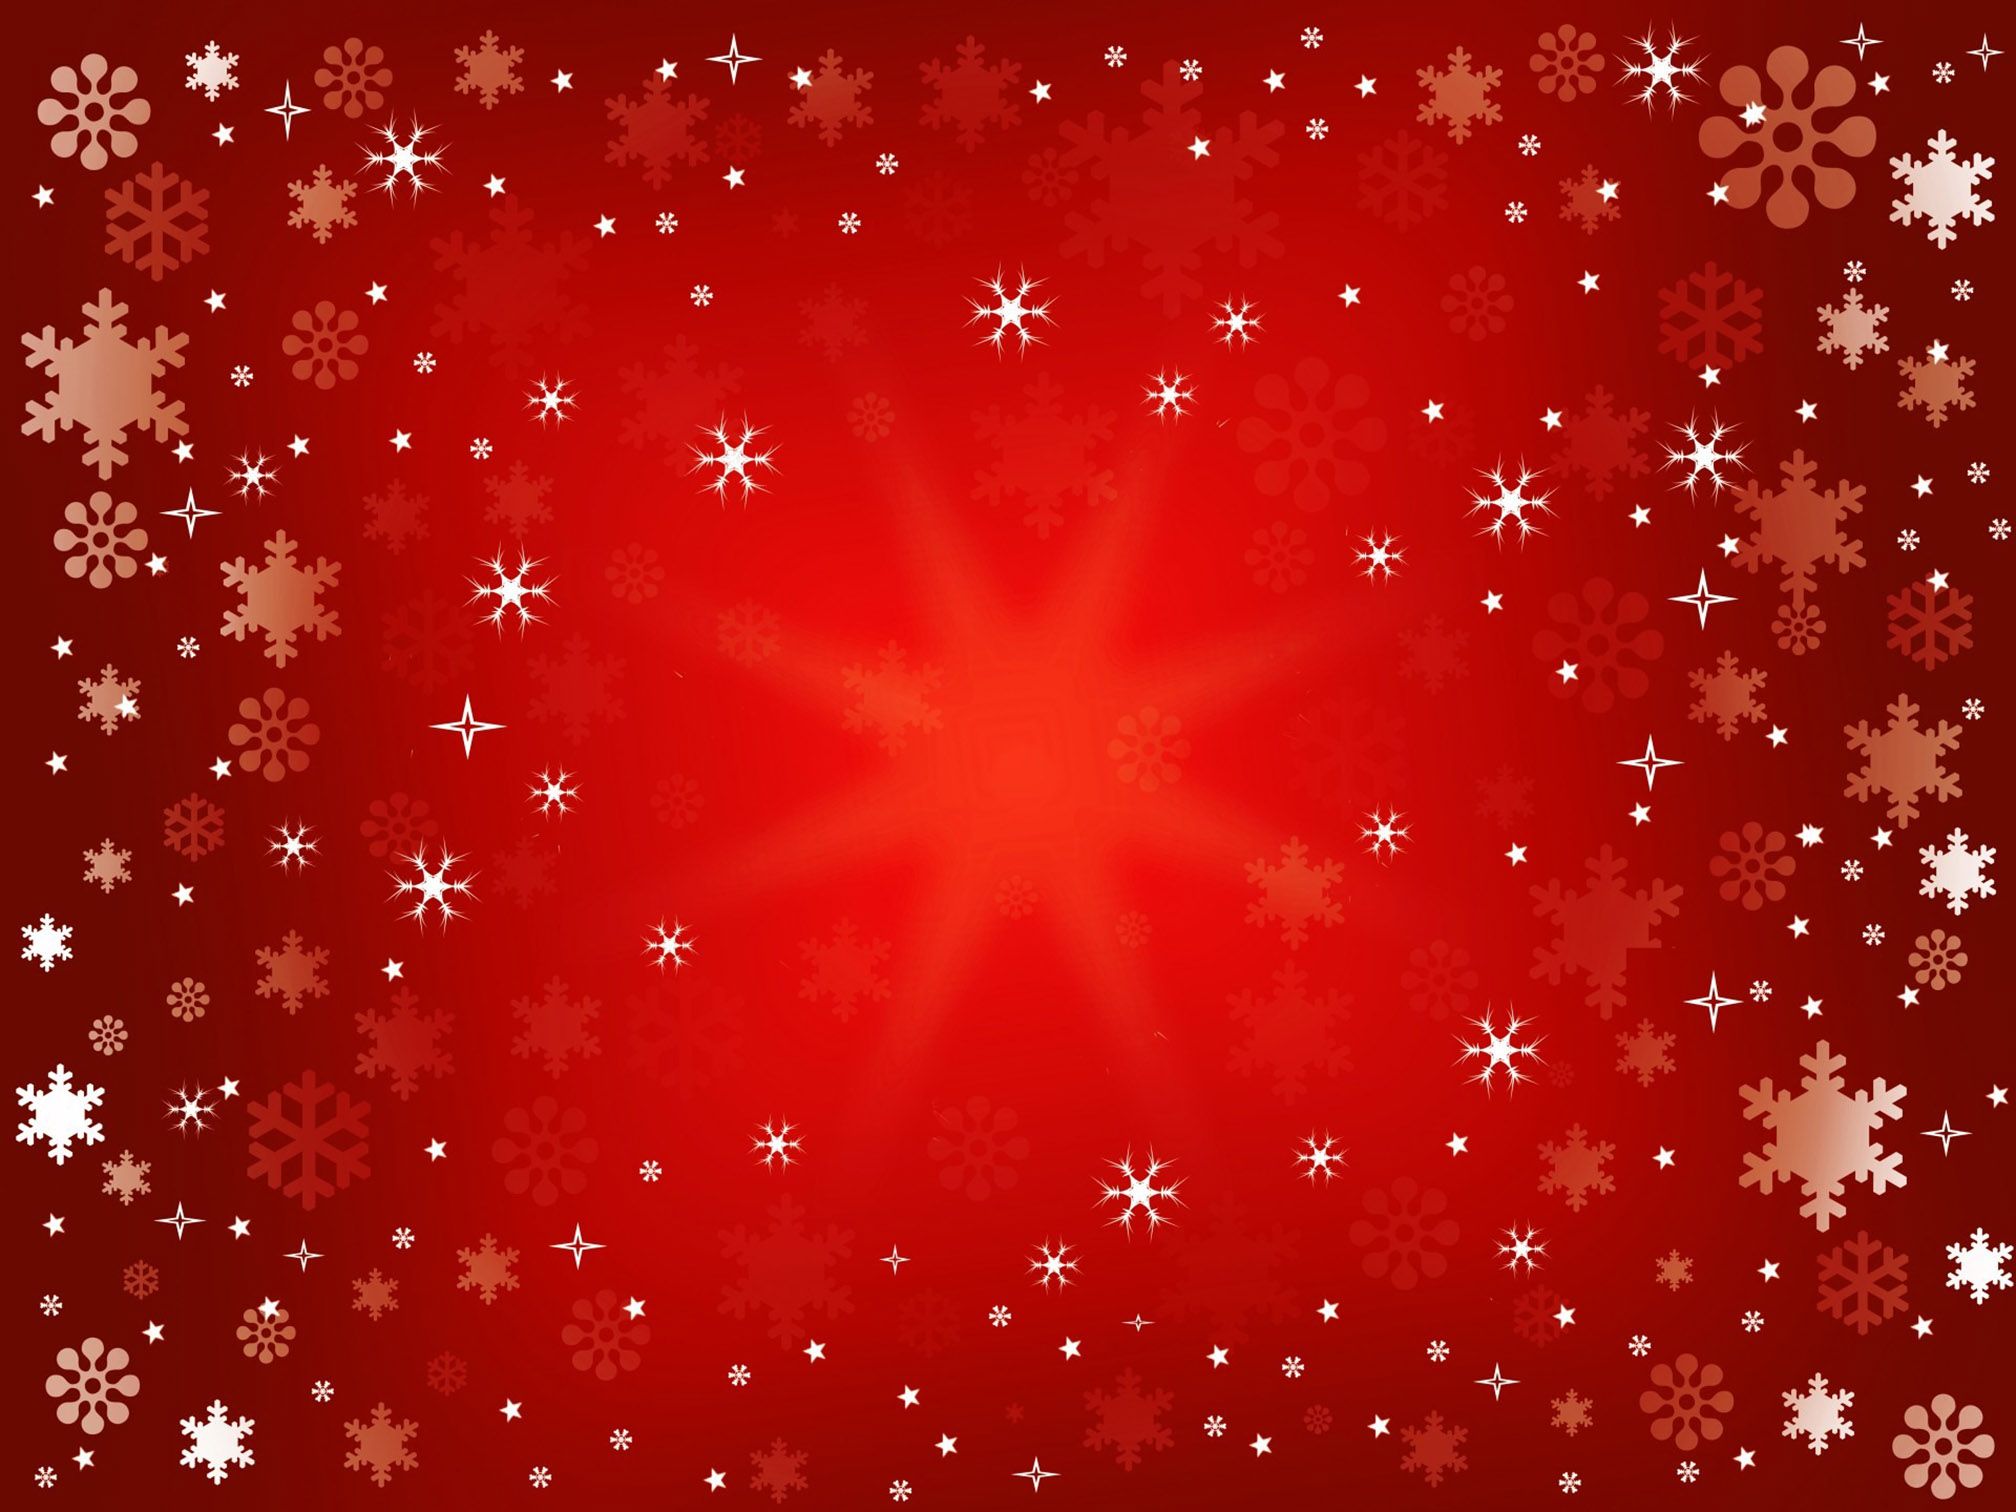 Christmas Background Image and Wallpaper